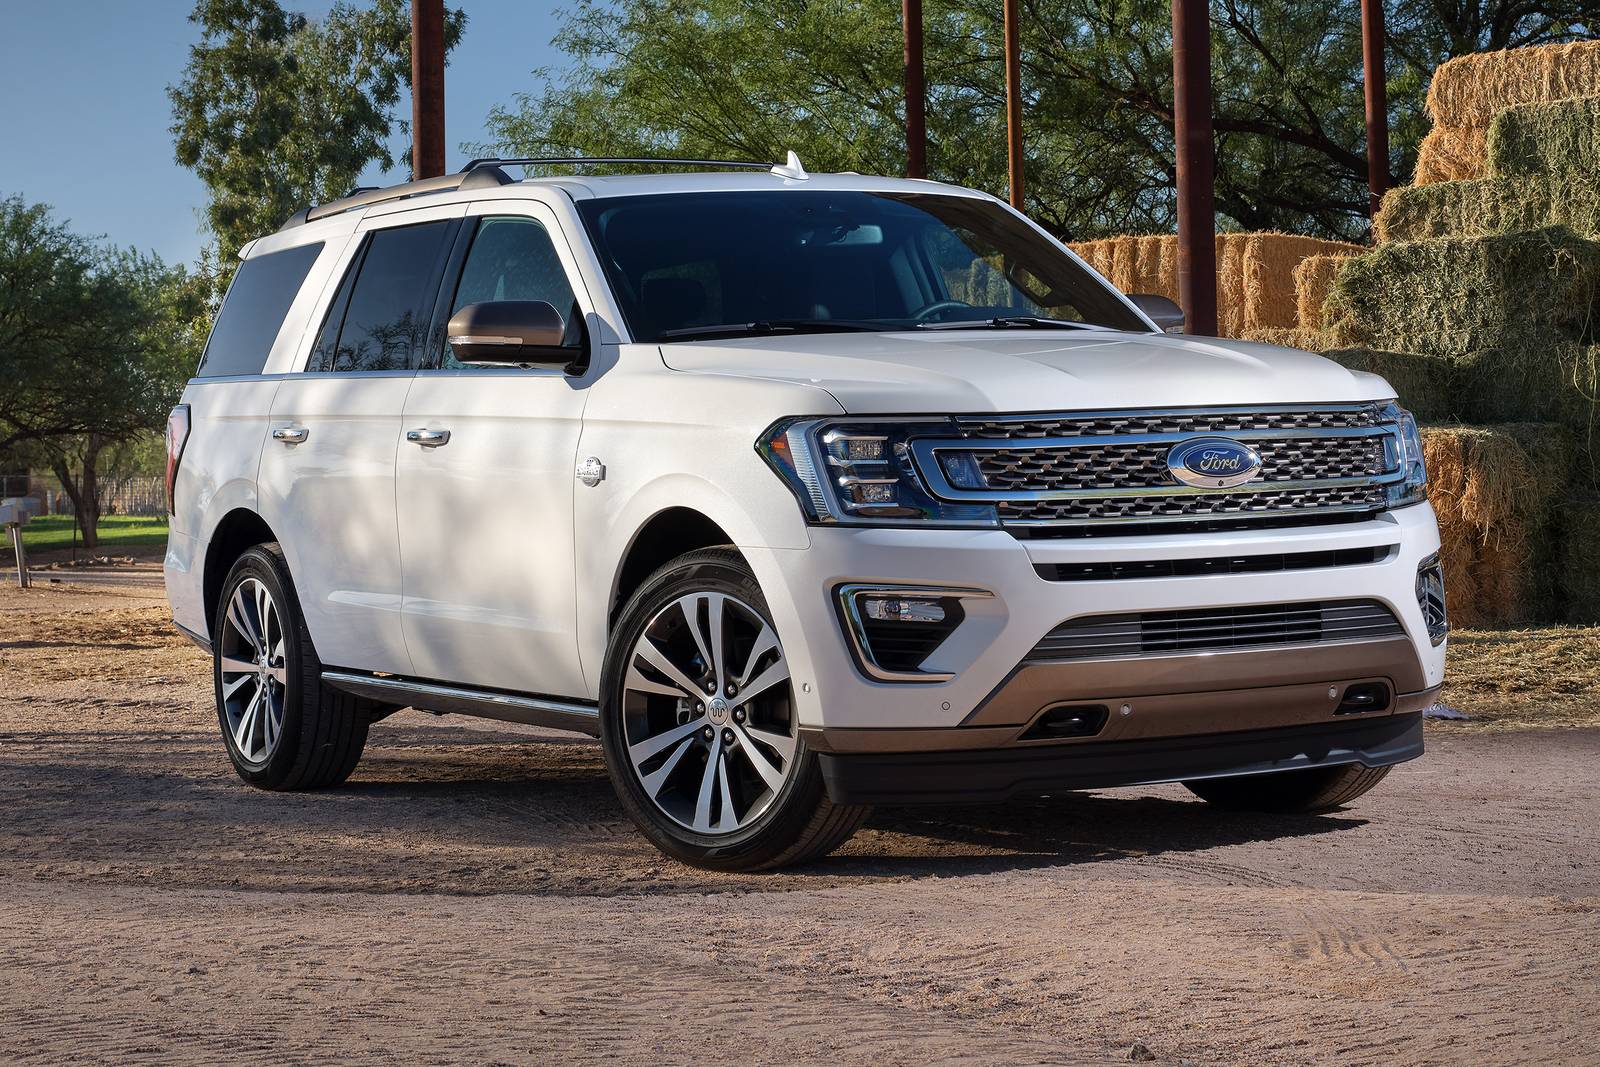 2021 Ford Expedition Review & Ratings | Edmunds